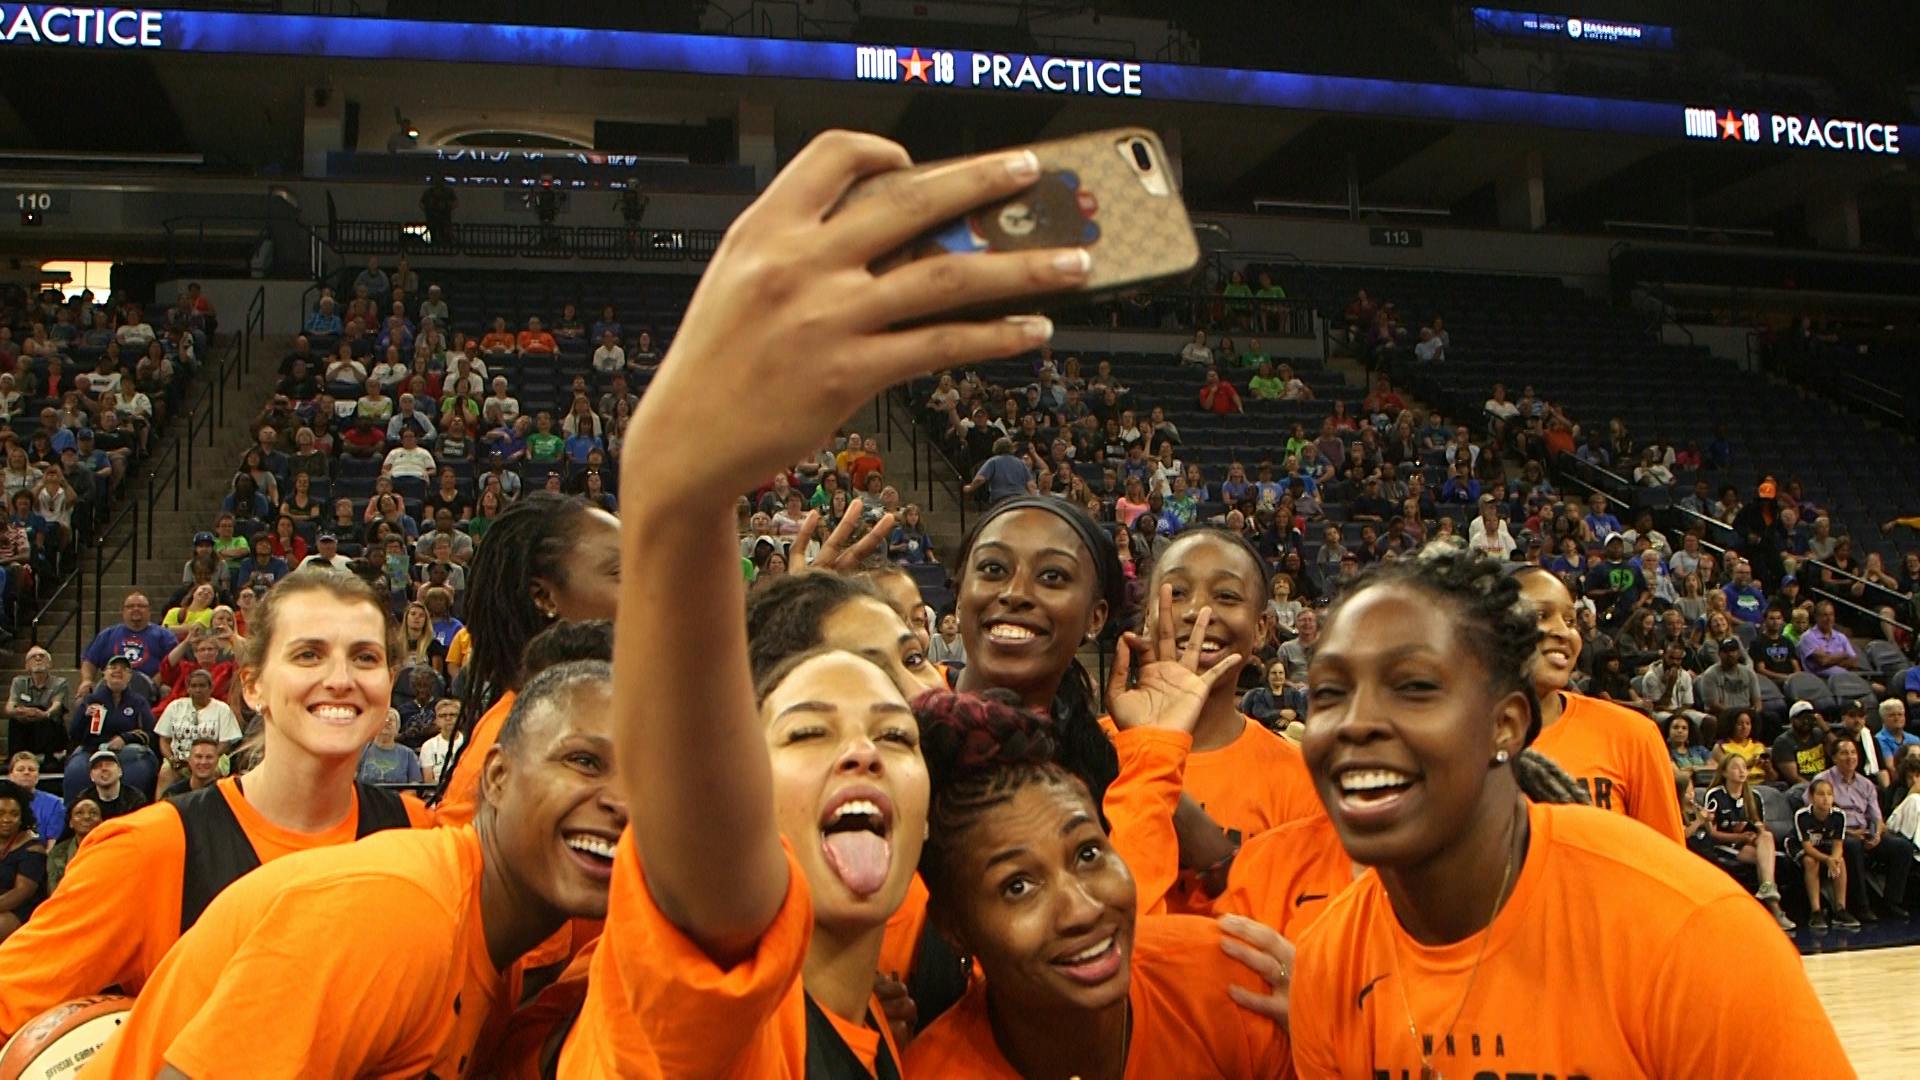 The WNBA all-stars showed off and entertained the crowd during their practice.